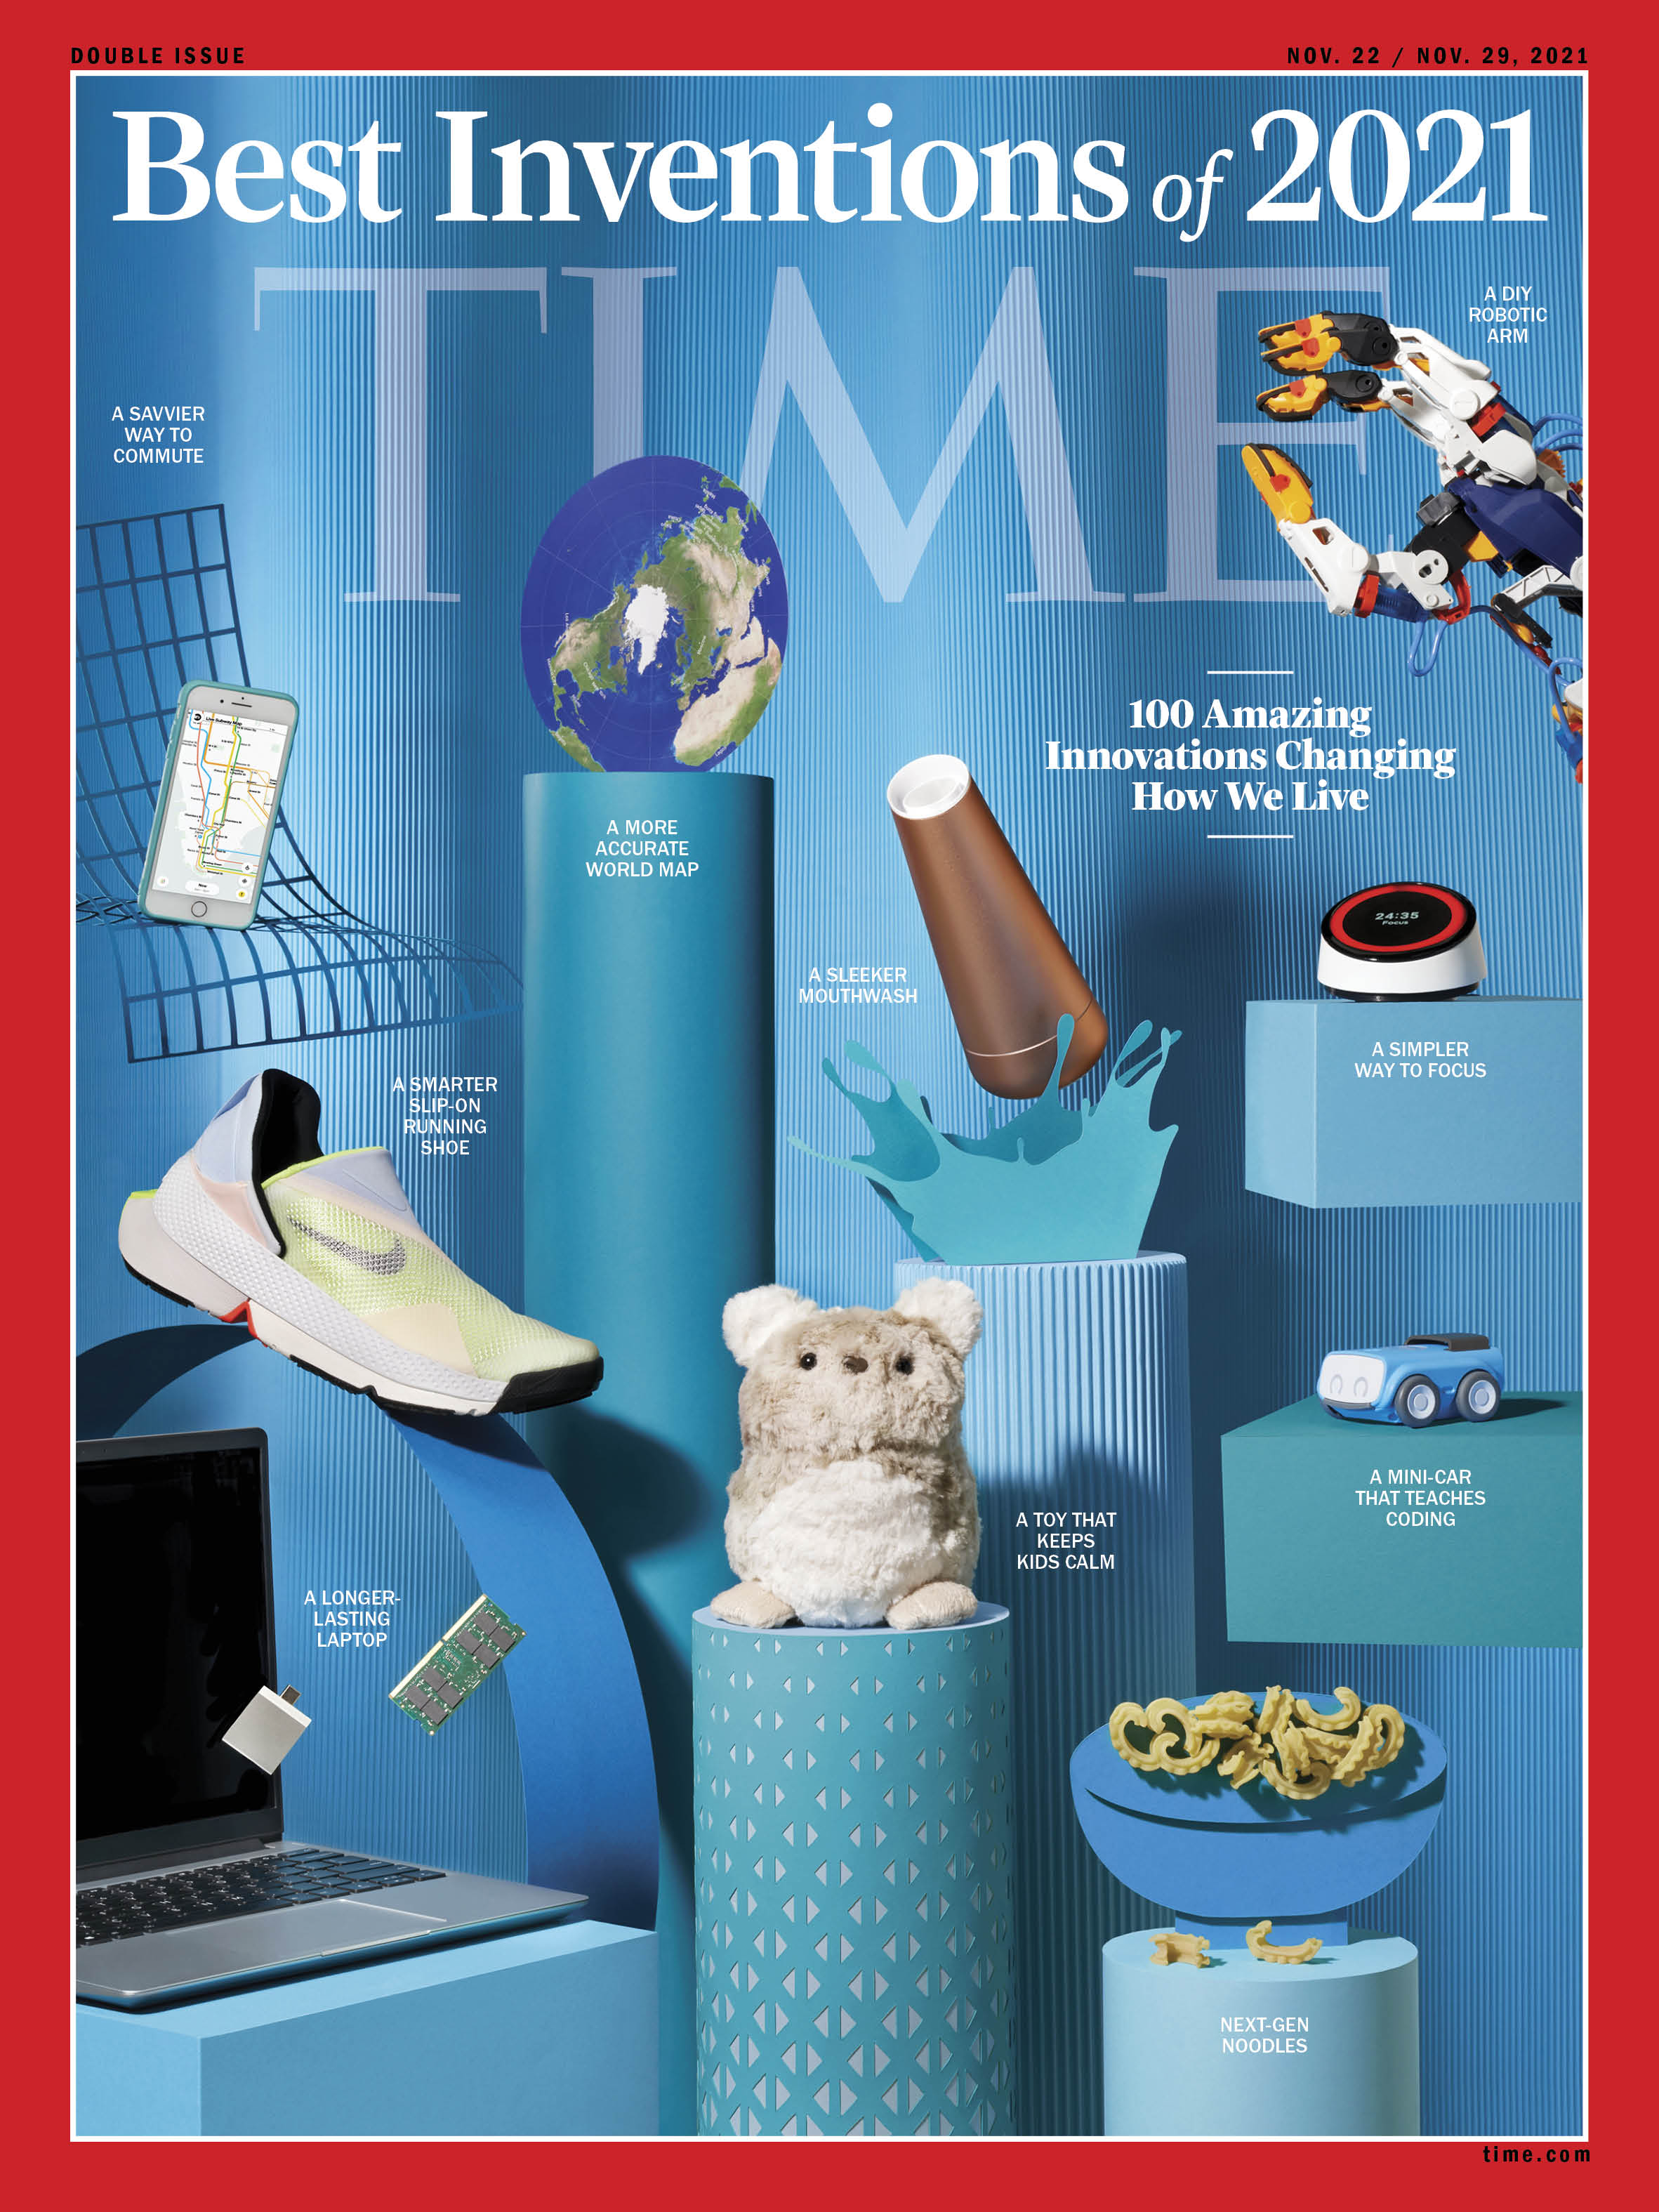 Sphero indi is included in TIME's Best Inventions of 2021 list.